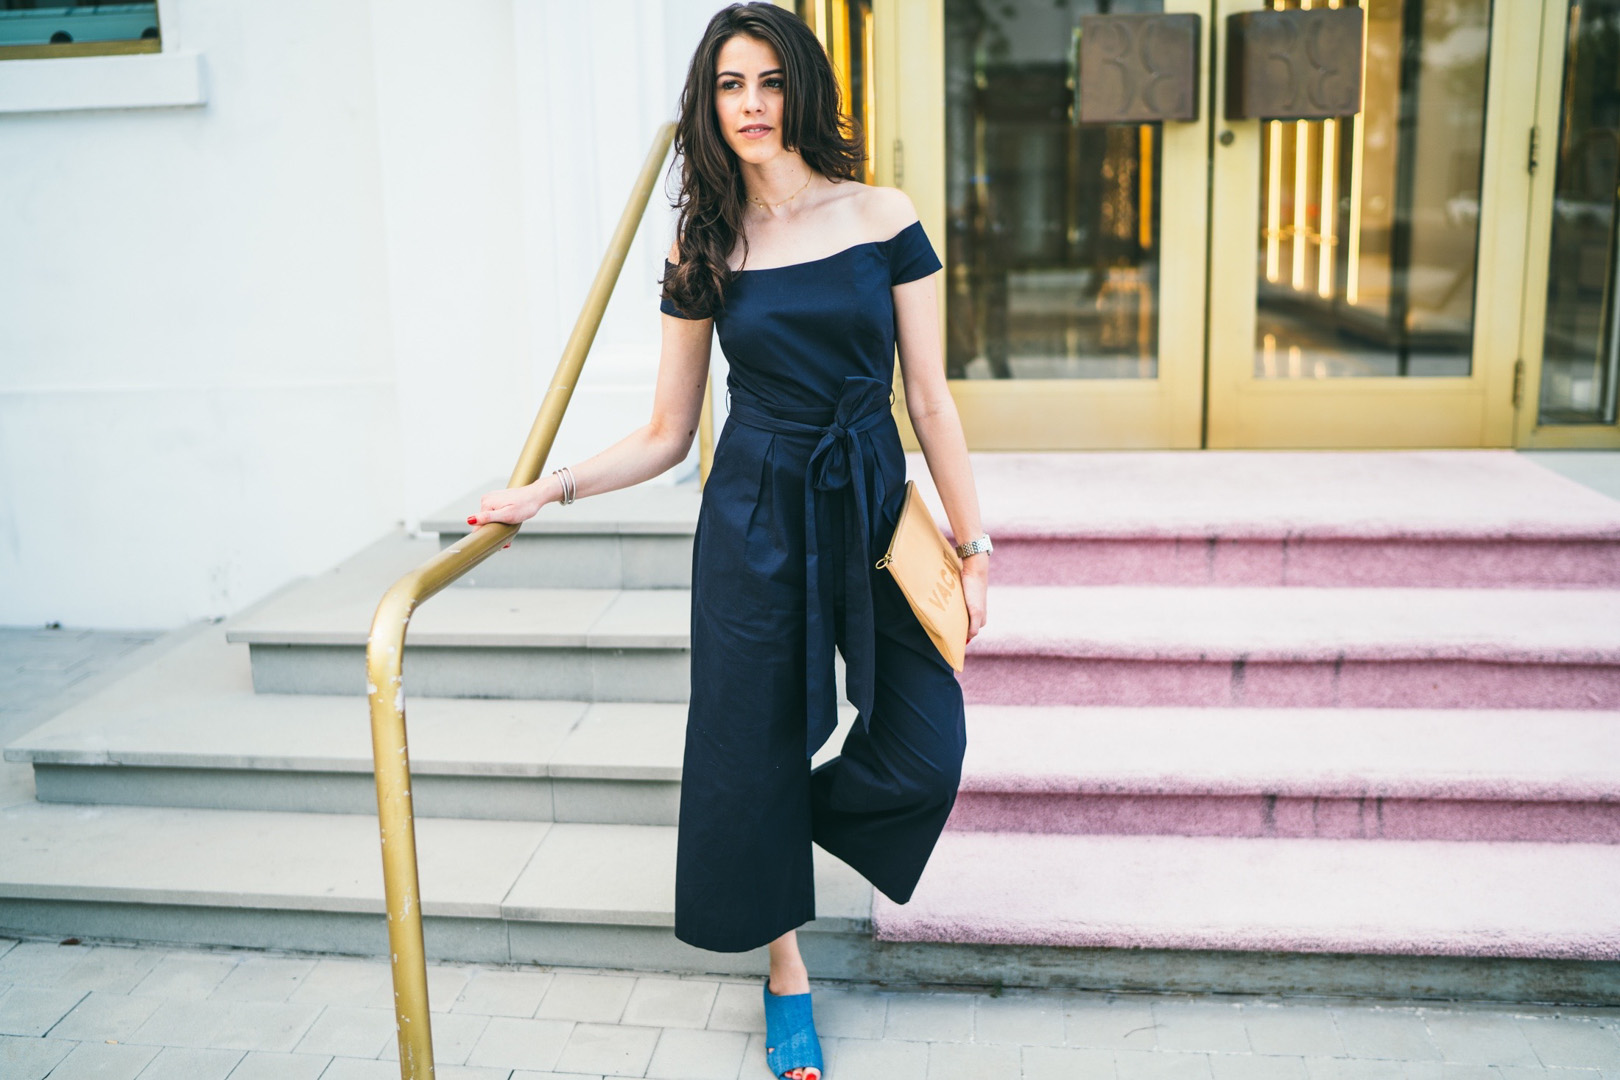 Jackie Roque styling a Chelsea 28 Culotte jumpsuit in Miami.